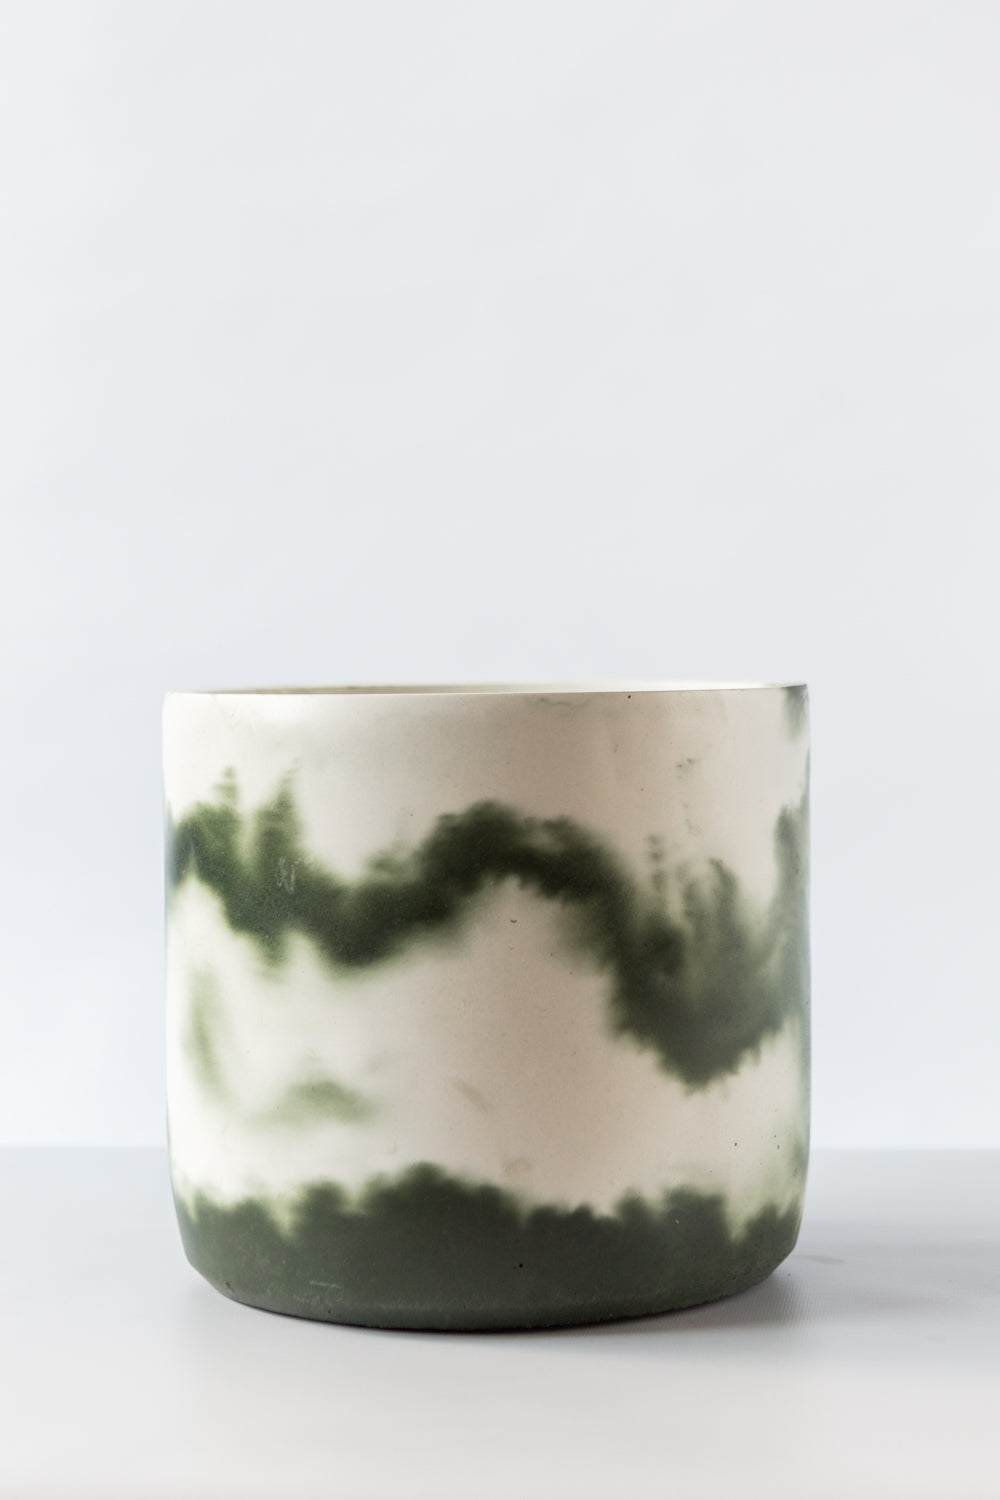 Muddy Green Plant Pots in sizes from small to extra last hand-cast by Concrete Jungle